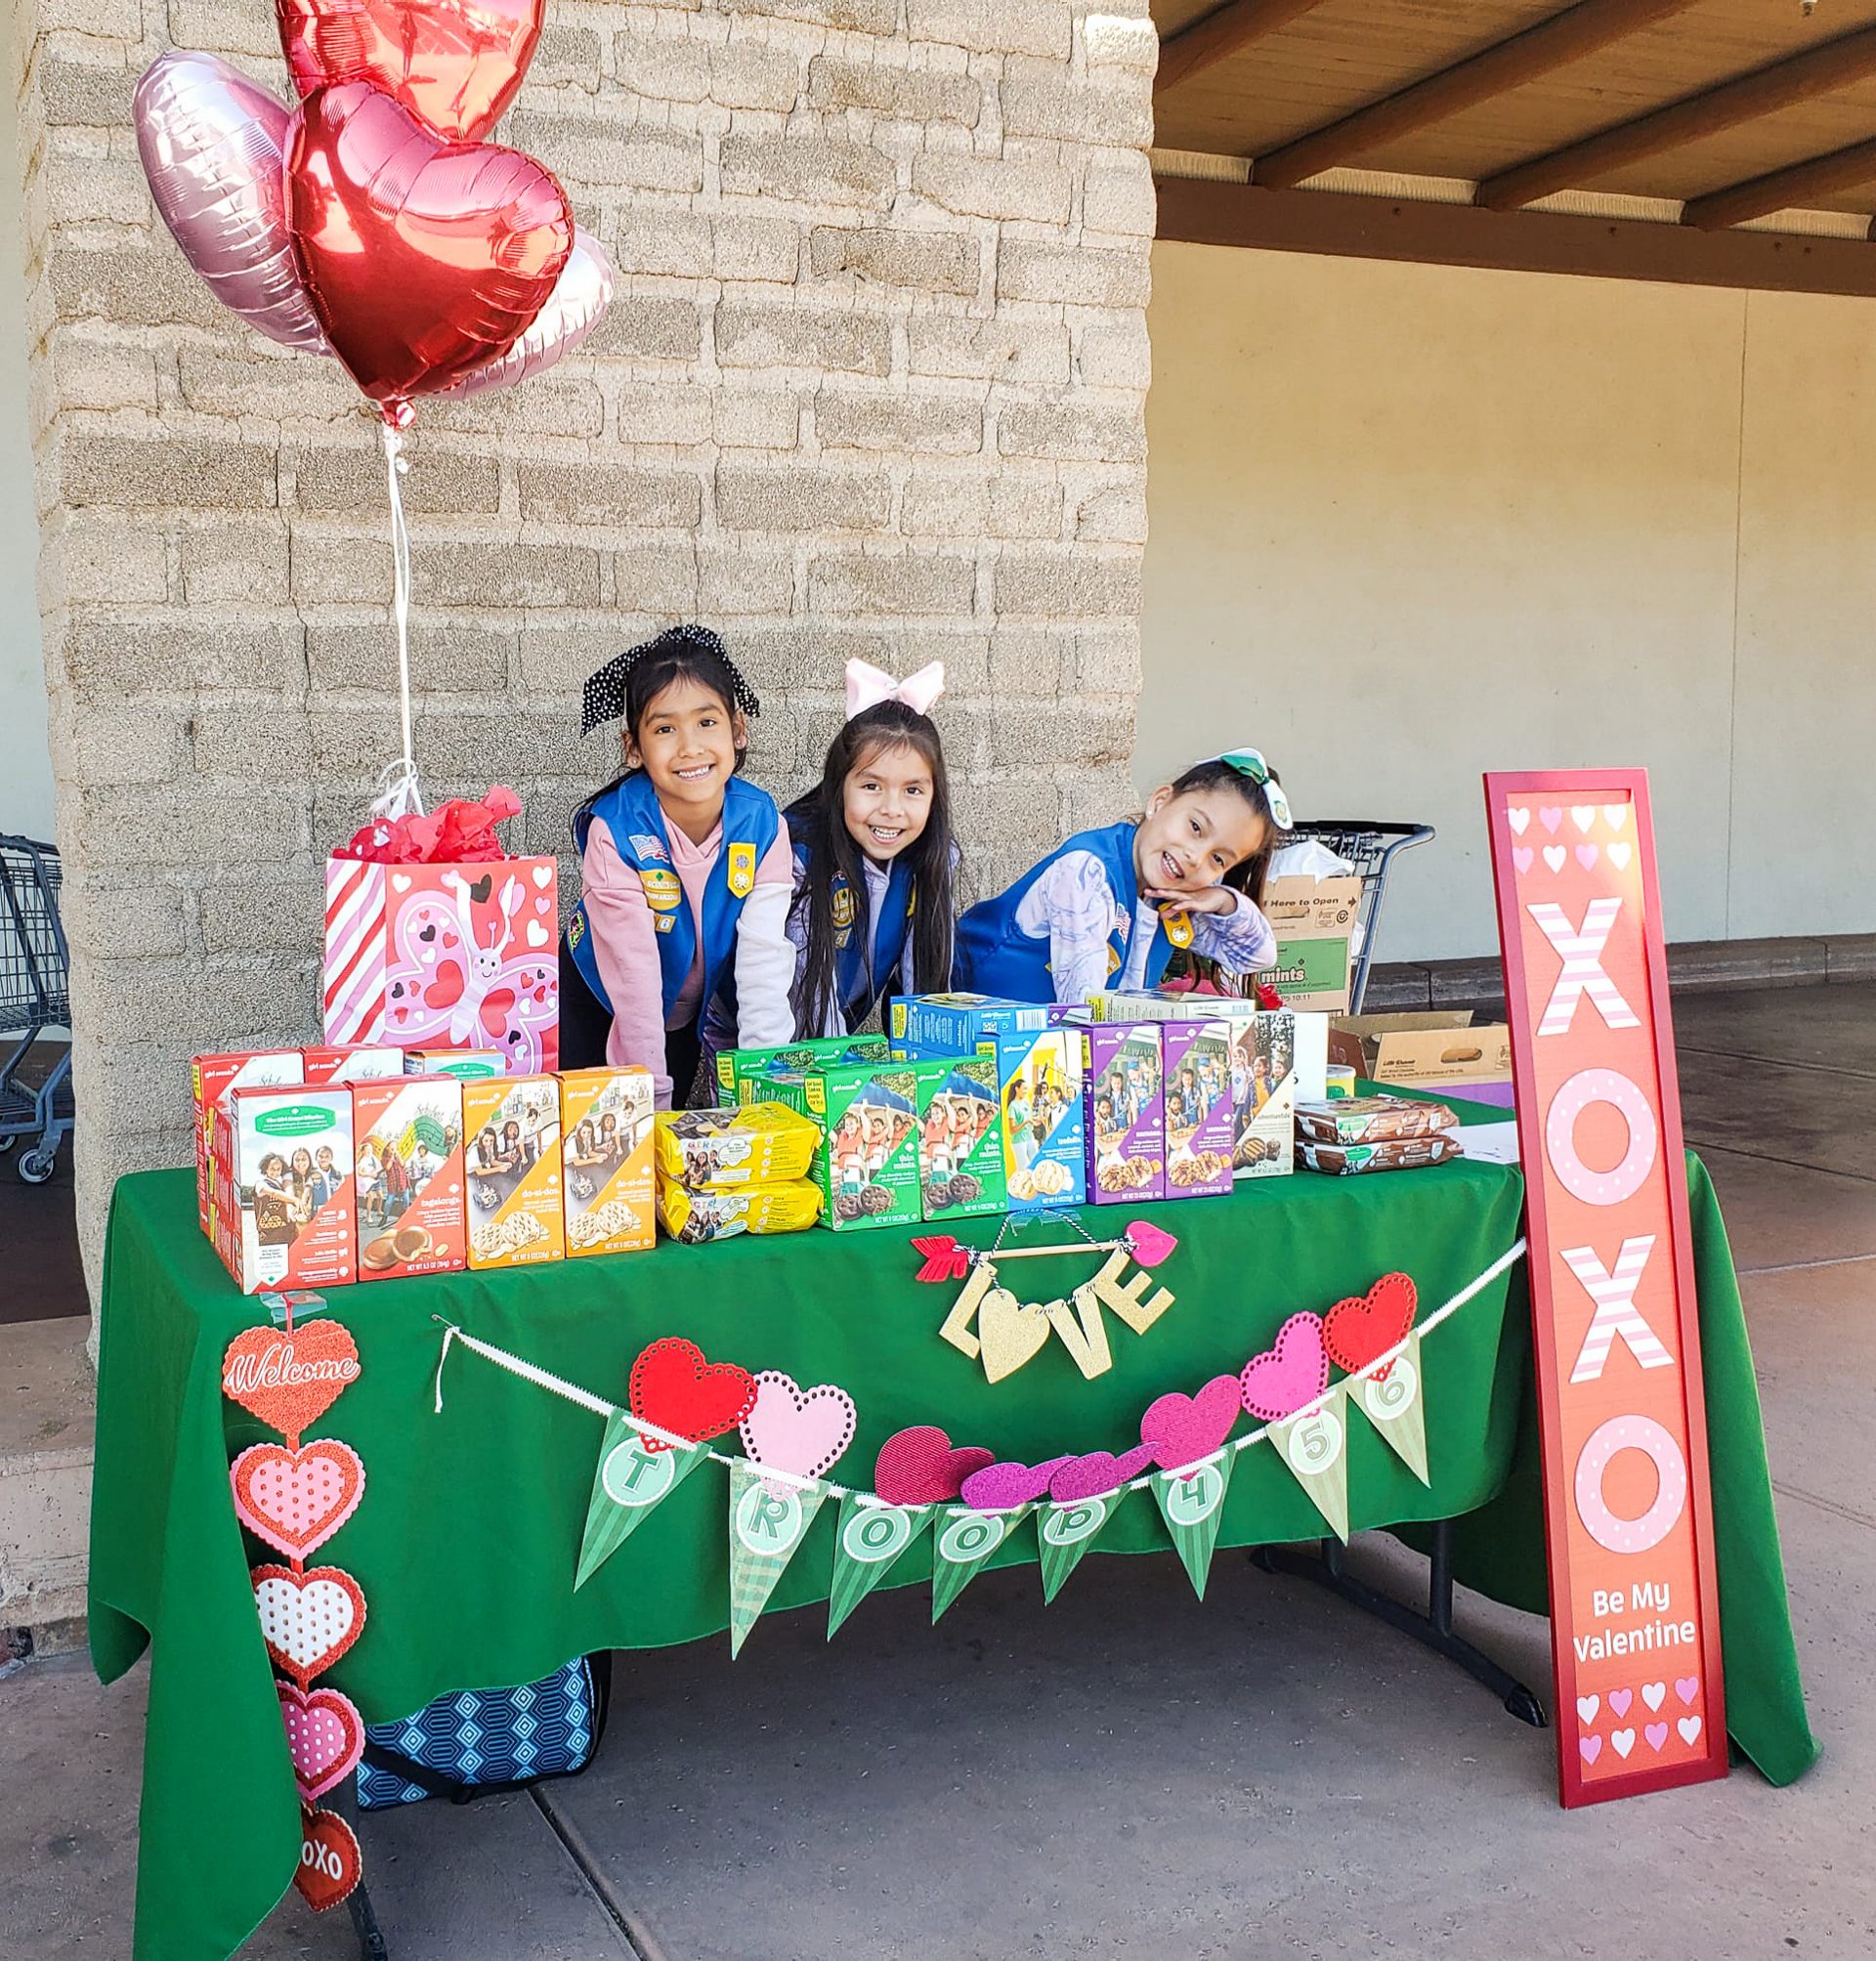 girl scout daisies smiling behind their cookie booth